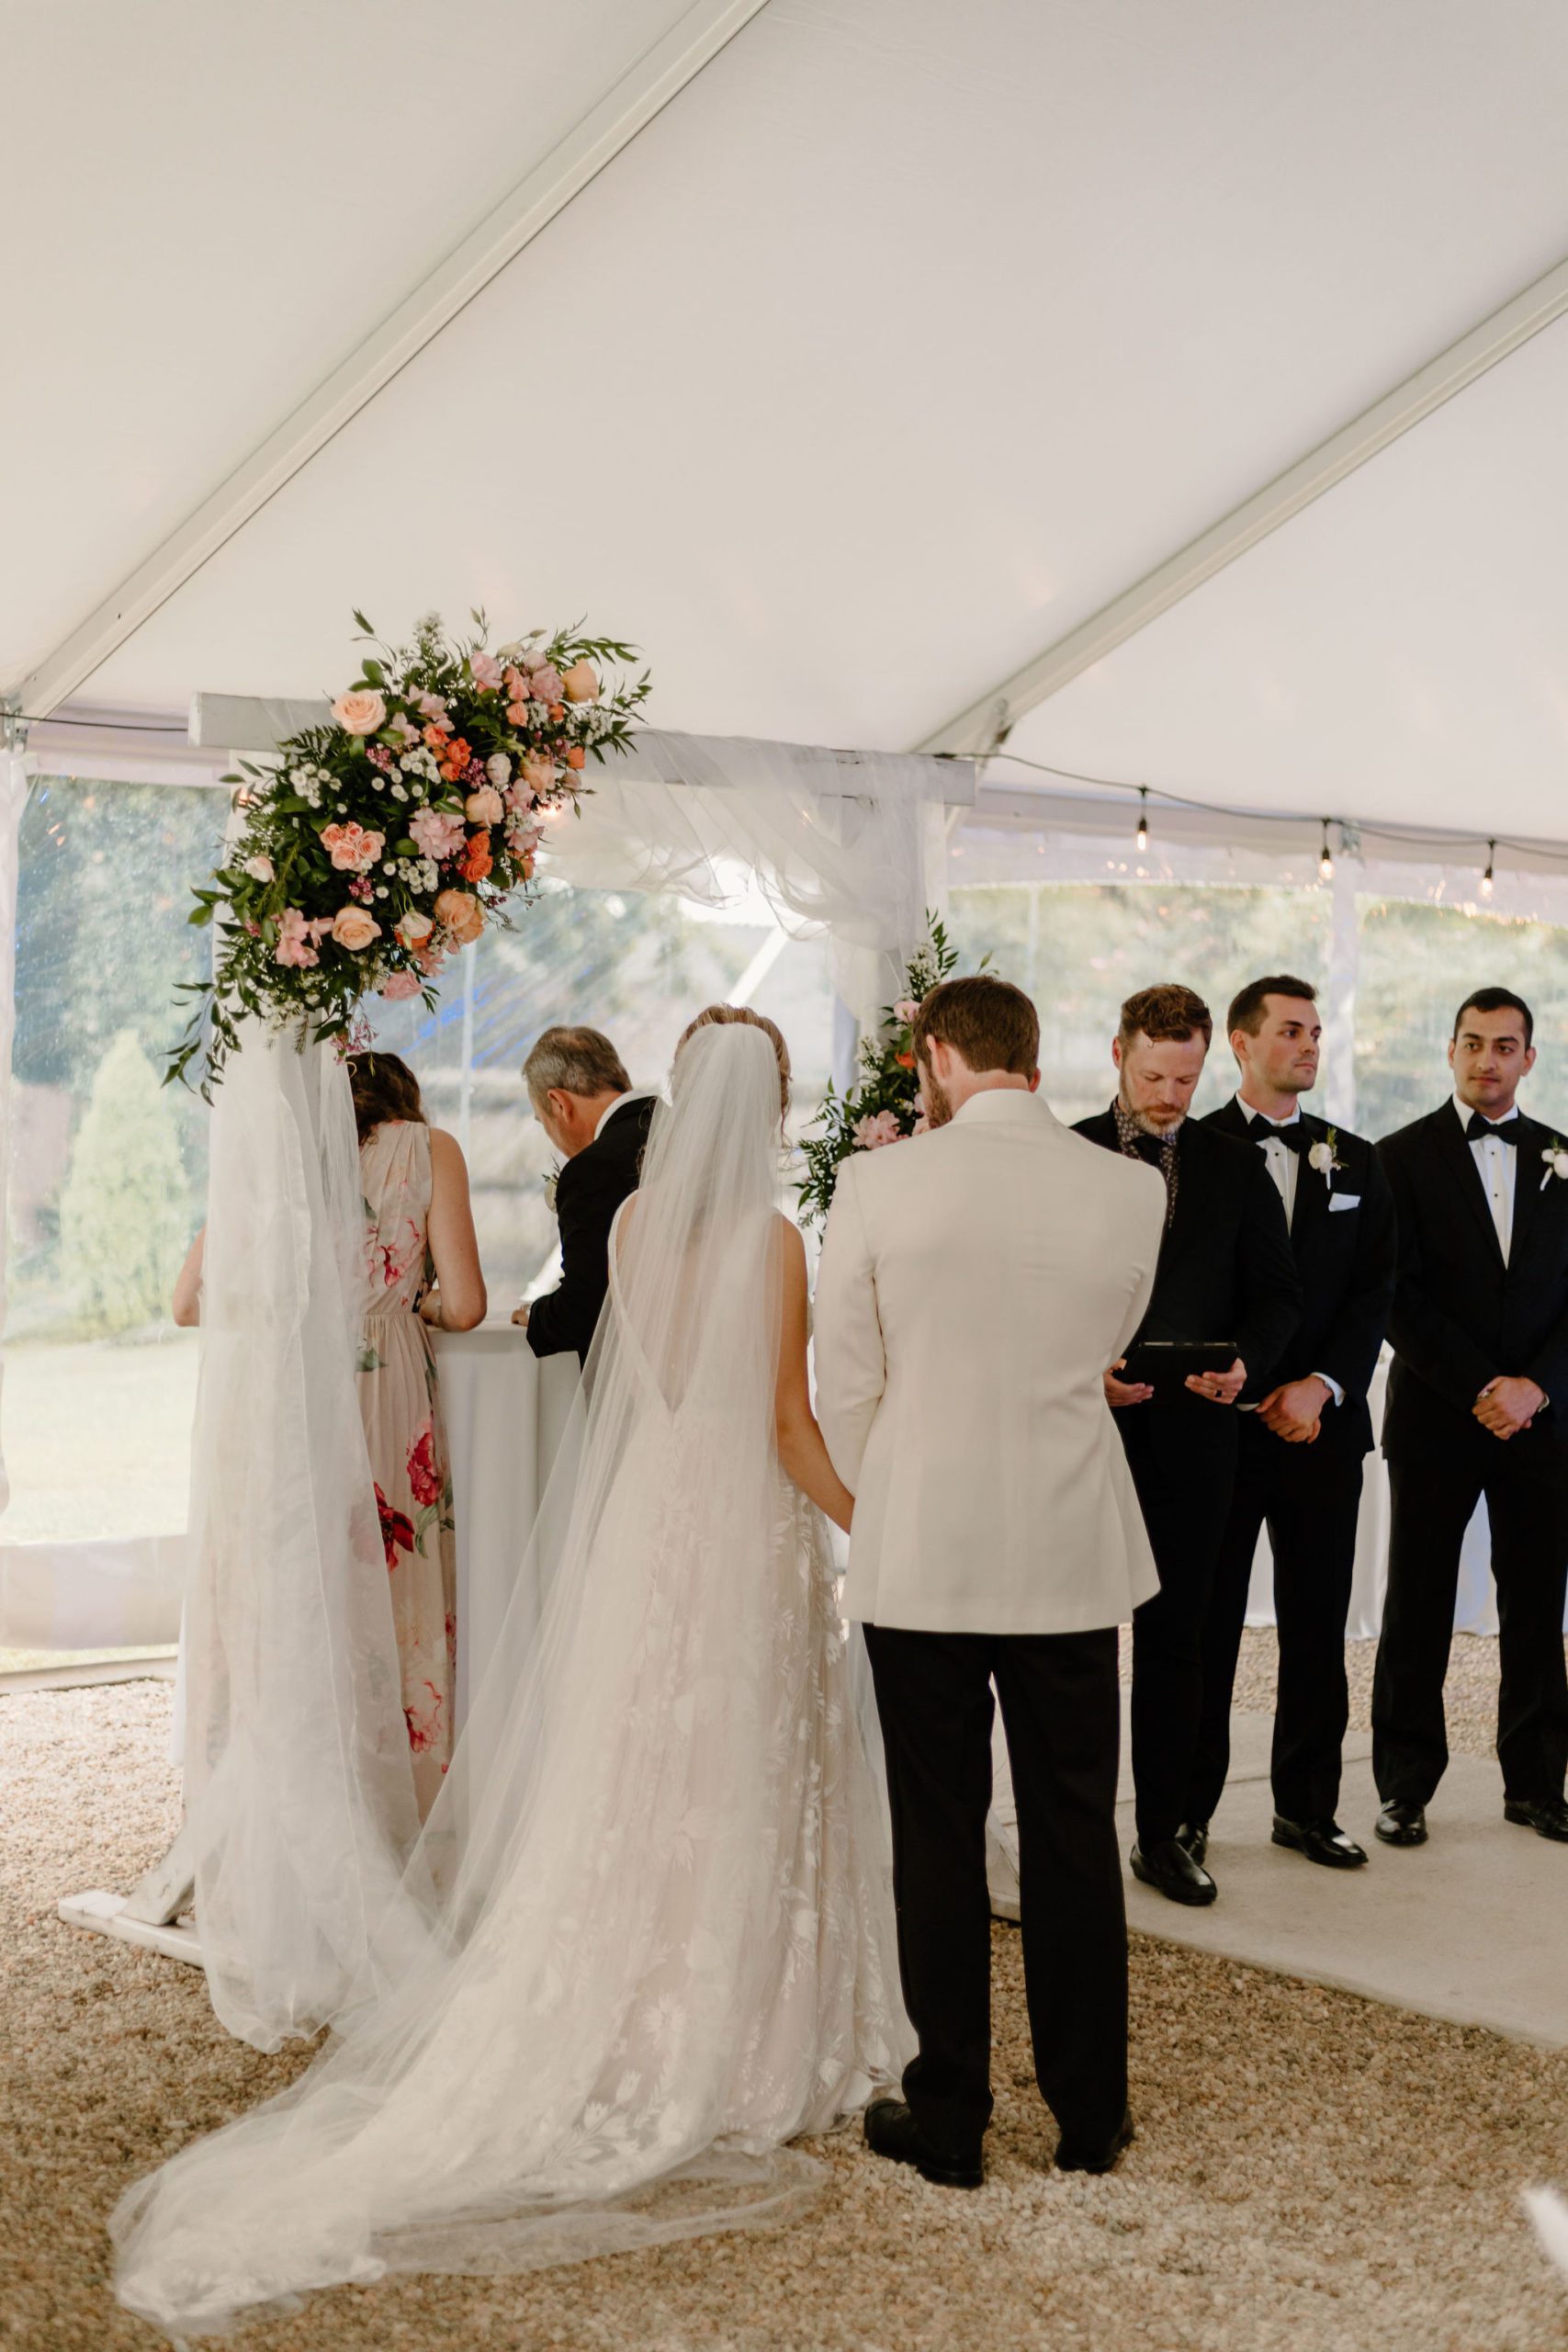 Beautiful Bride and Groom Getting Married At T. Austin Finch House In Thomasville, North Carolina